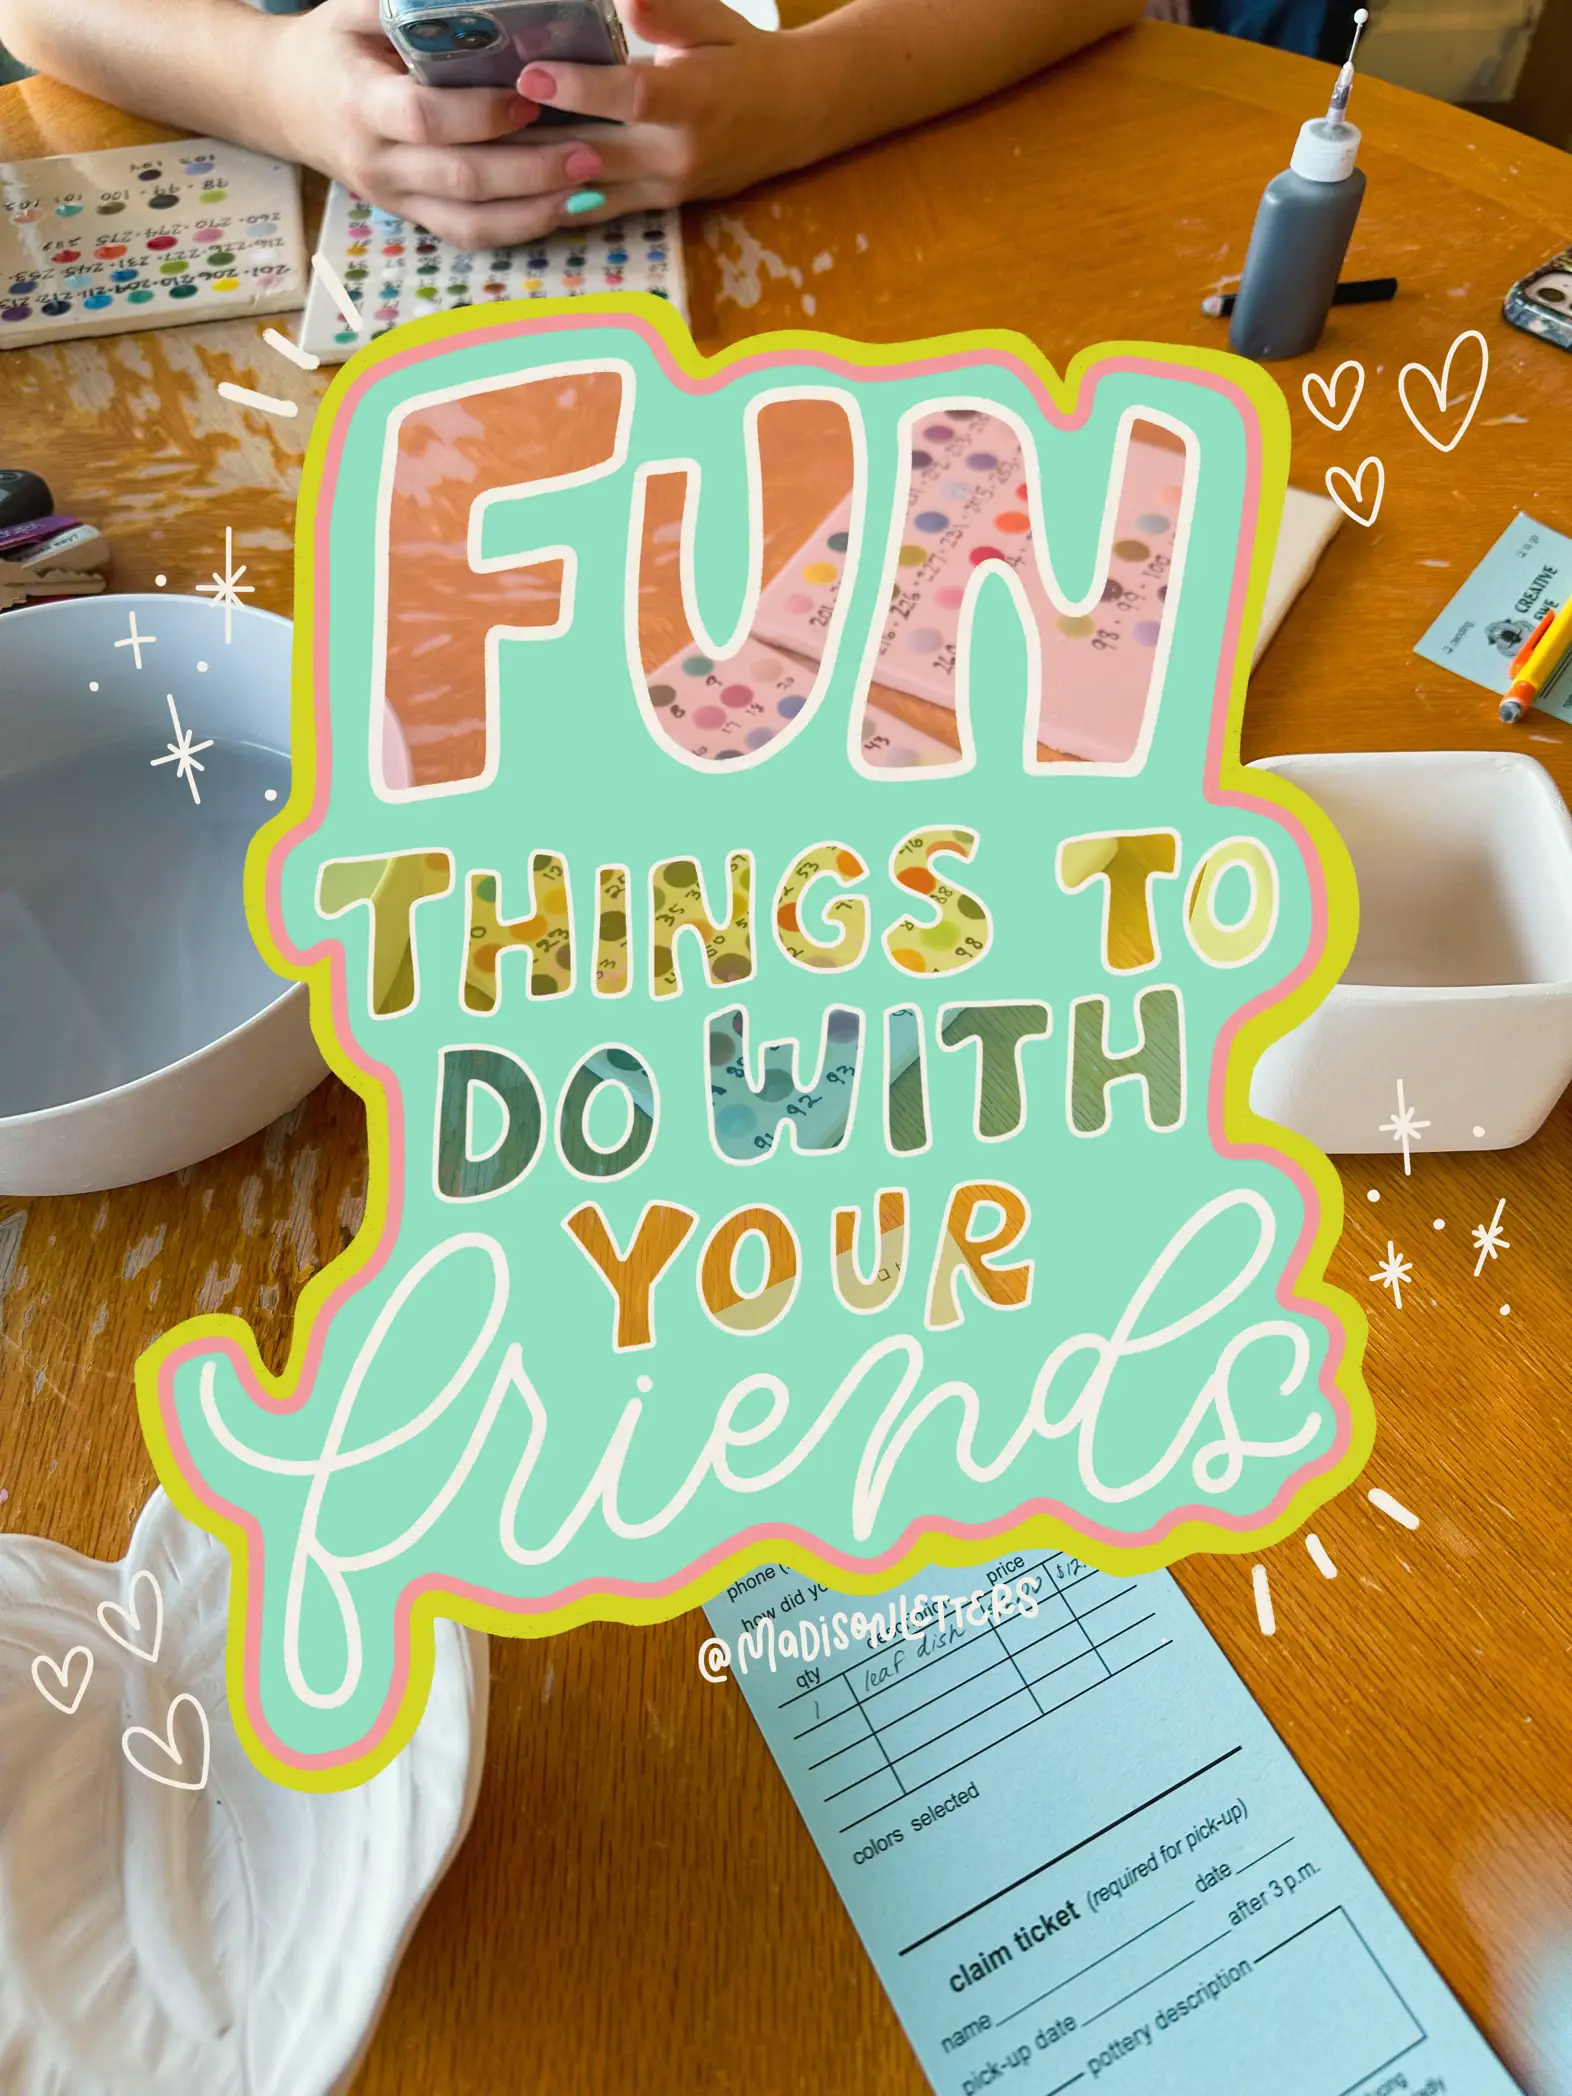 7 fun (+ cheap) things to do with friends!